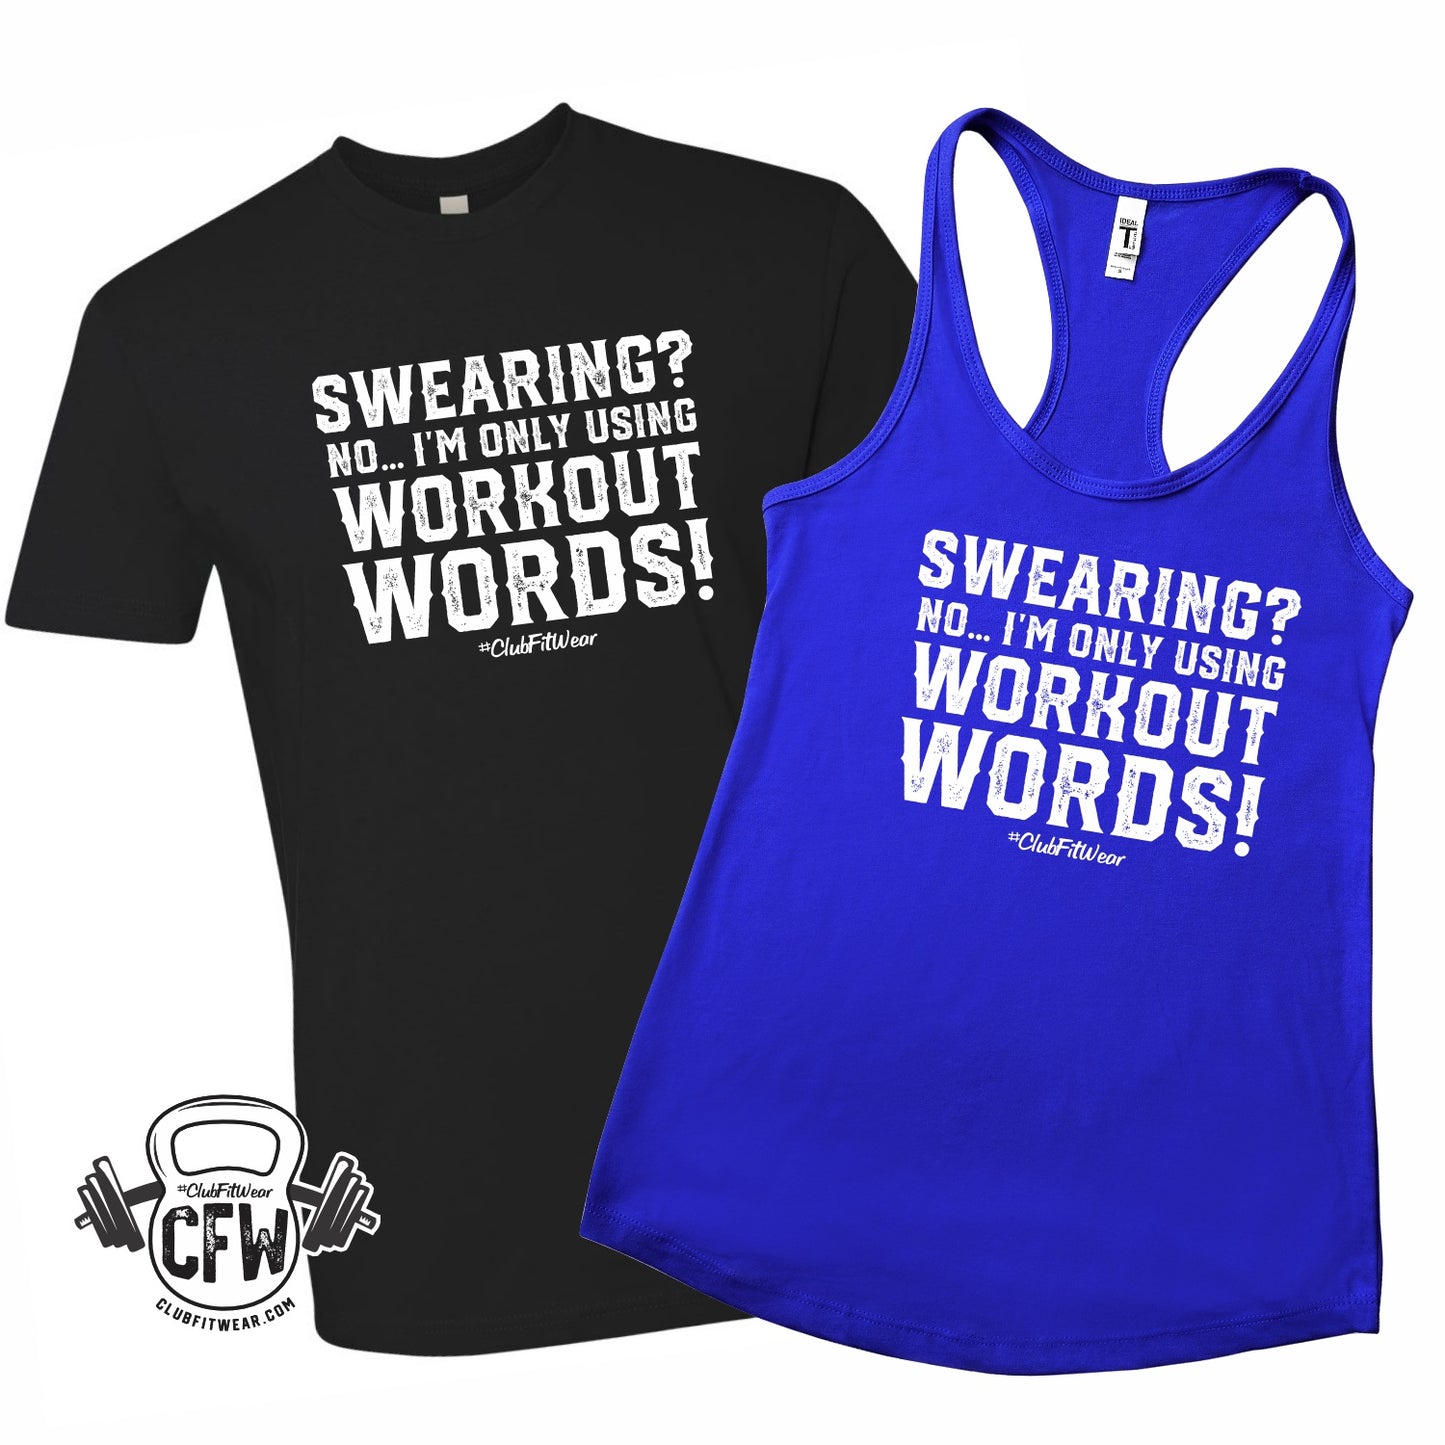 Swearing? No... I'm only using Workout Words